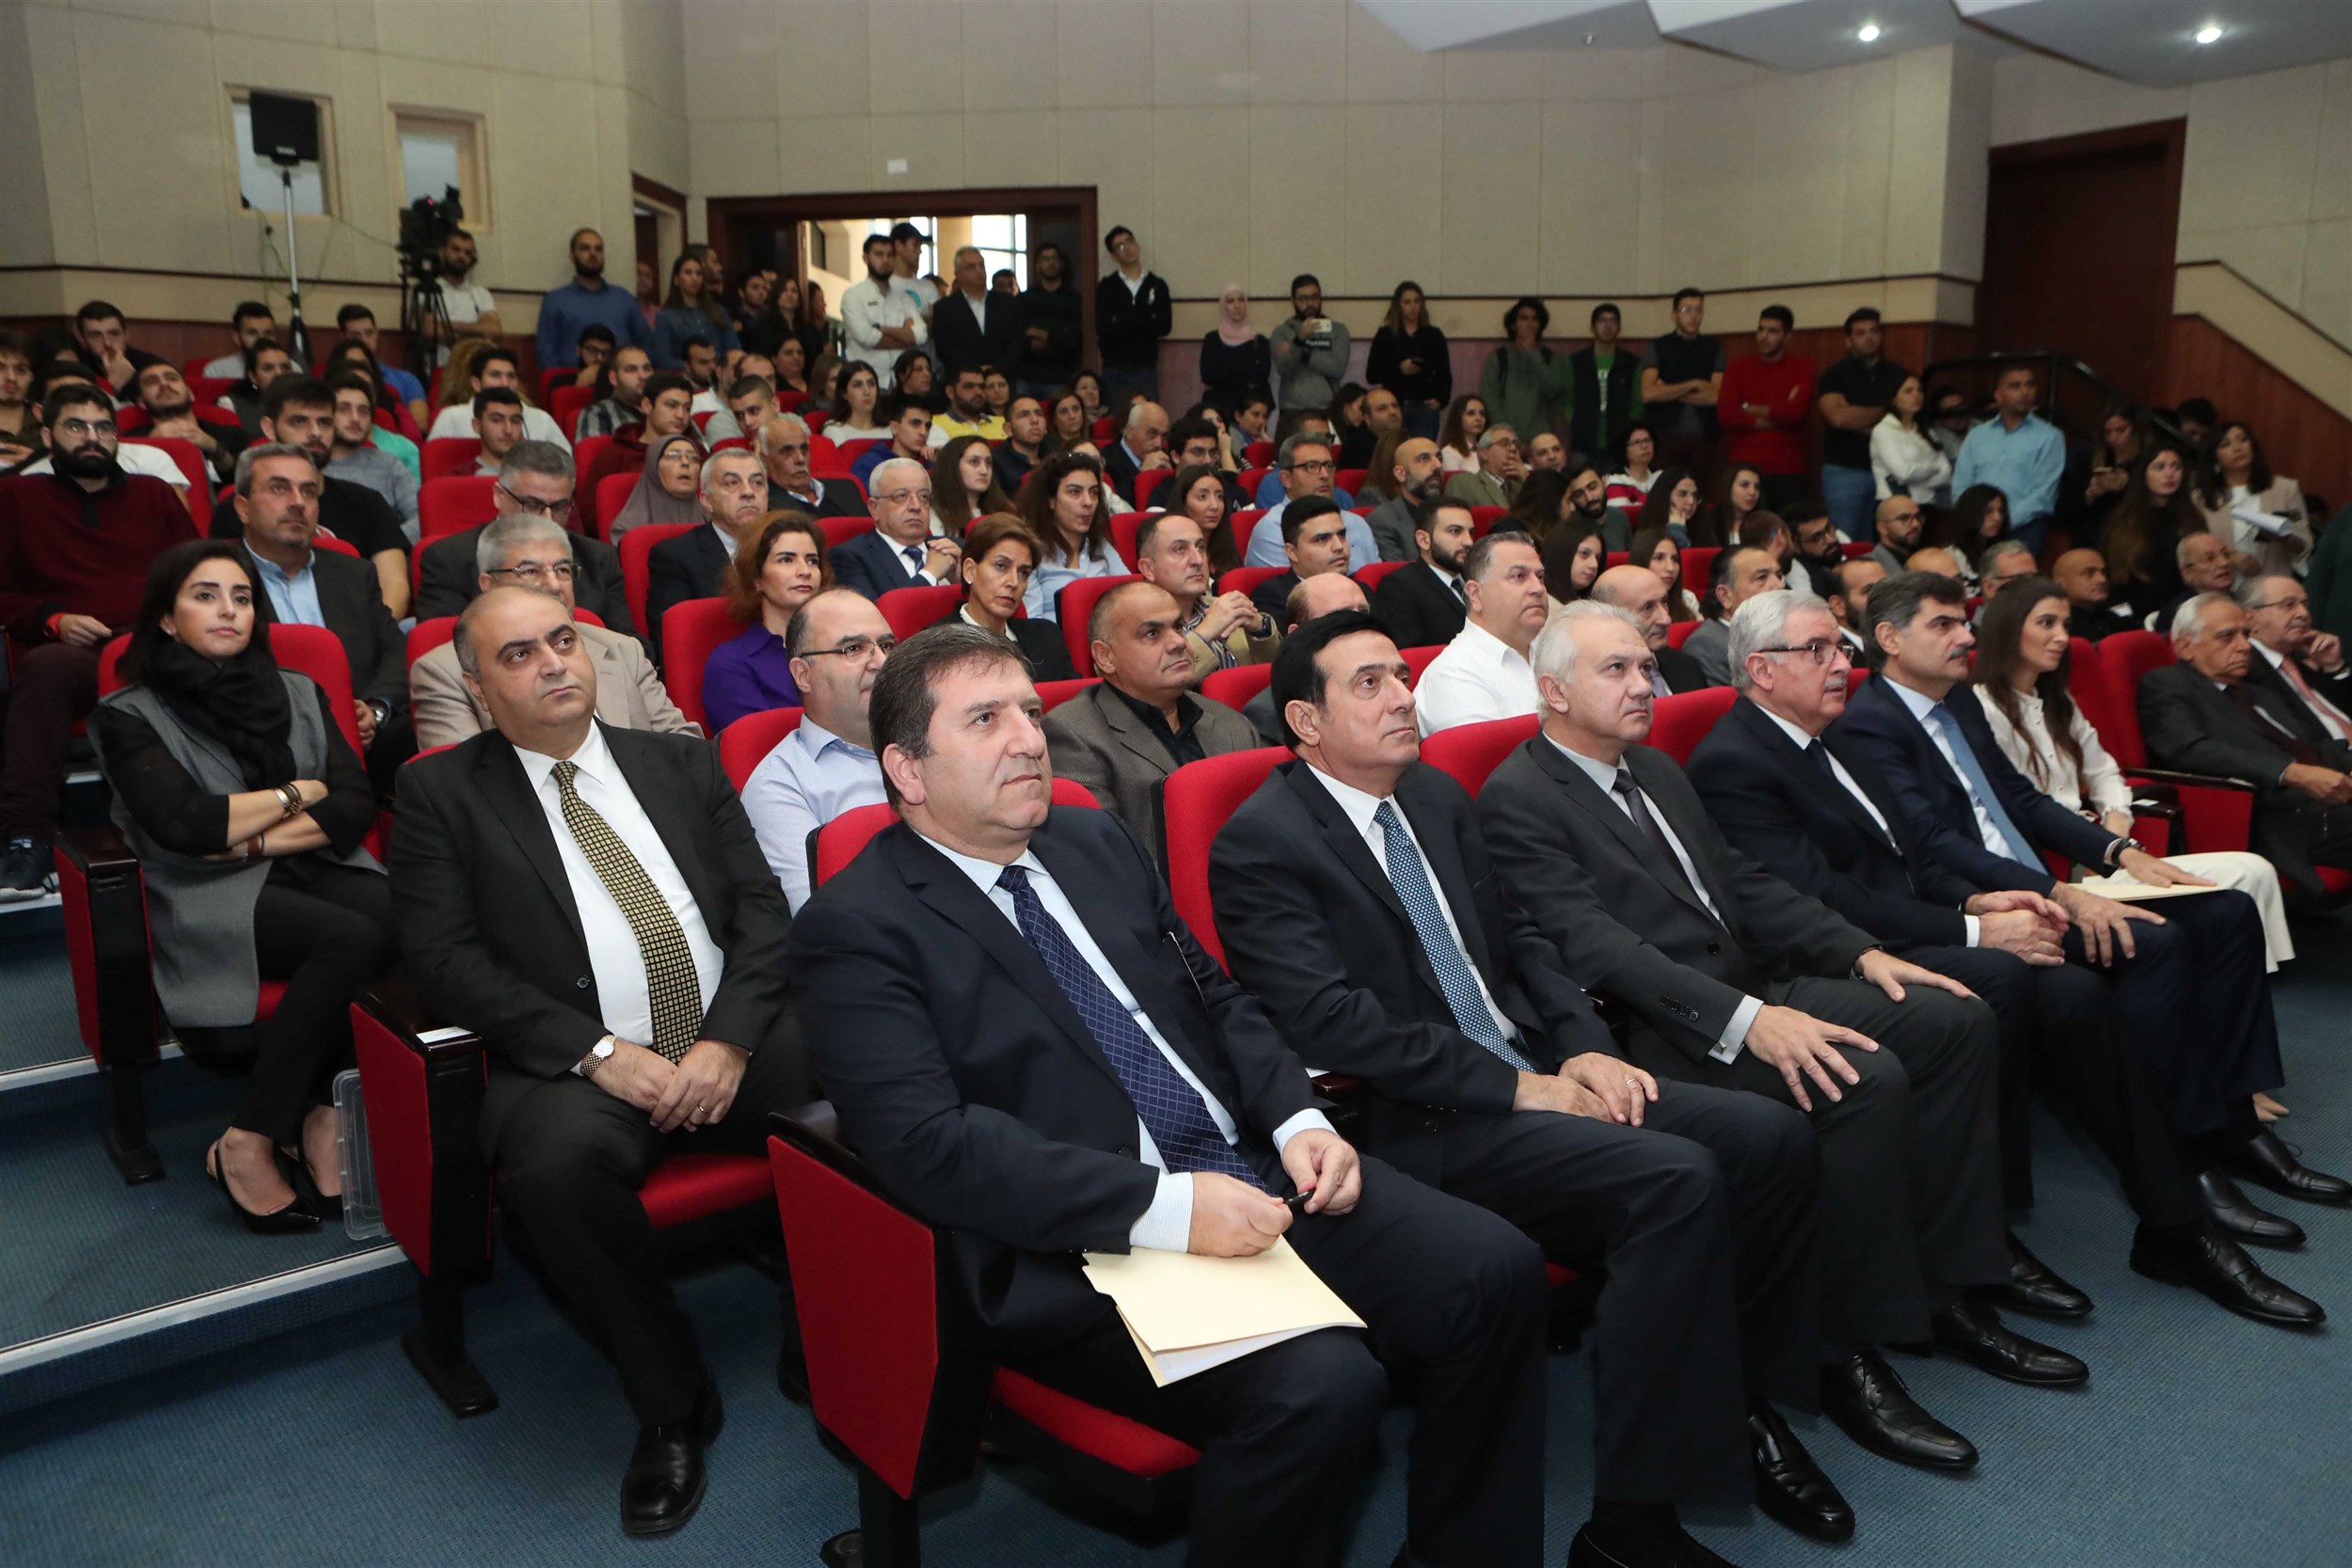 students,  faculty  members  and heads  of the  university of  balamand as well as  the media attended the main event that is rooted in mrs. inas al jarmakani’s strong support and belief in the power of education and perseverance.